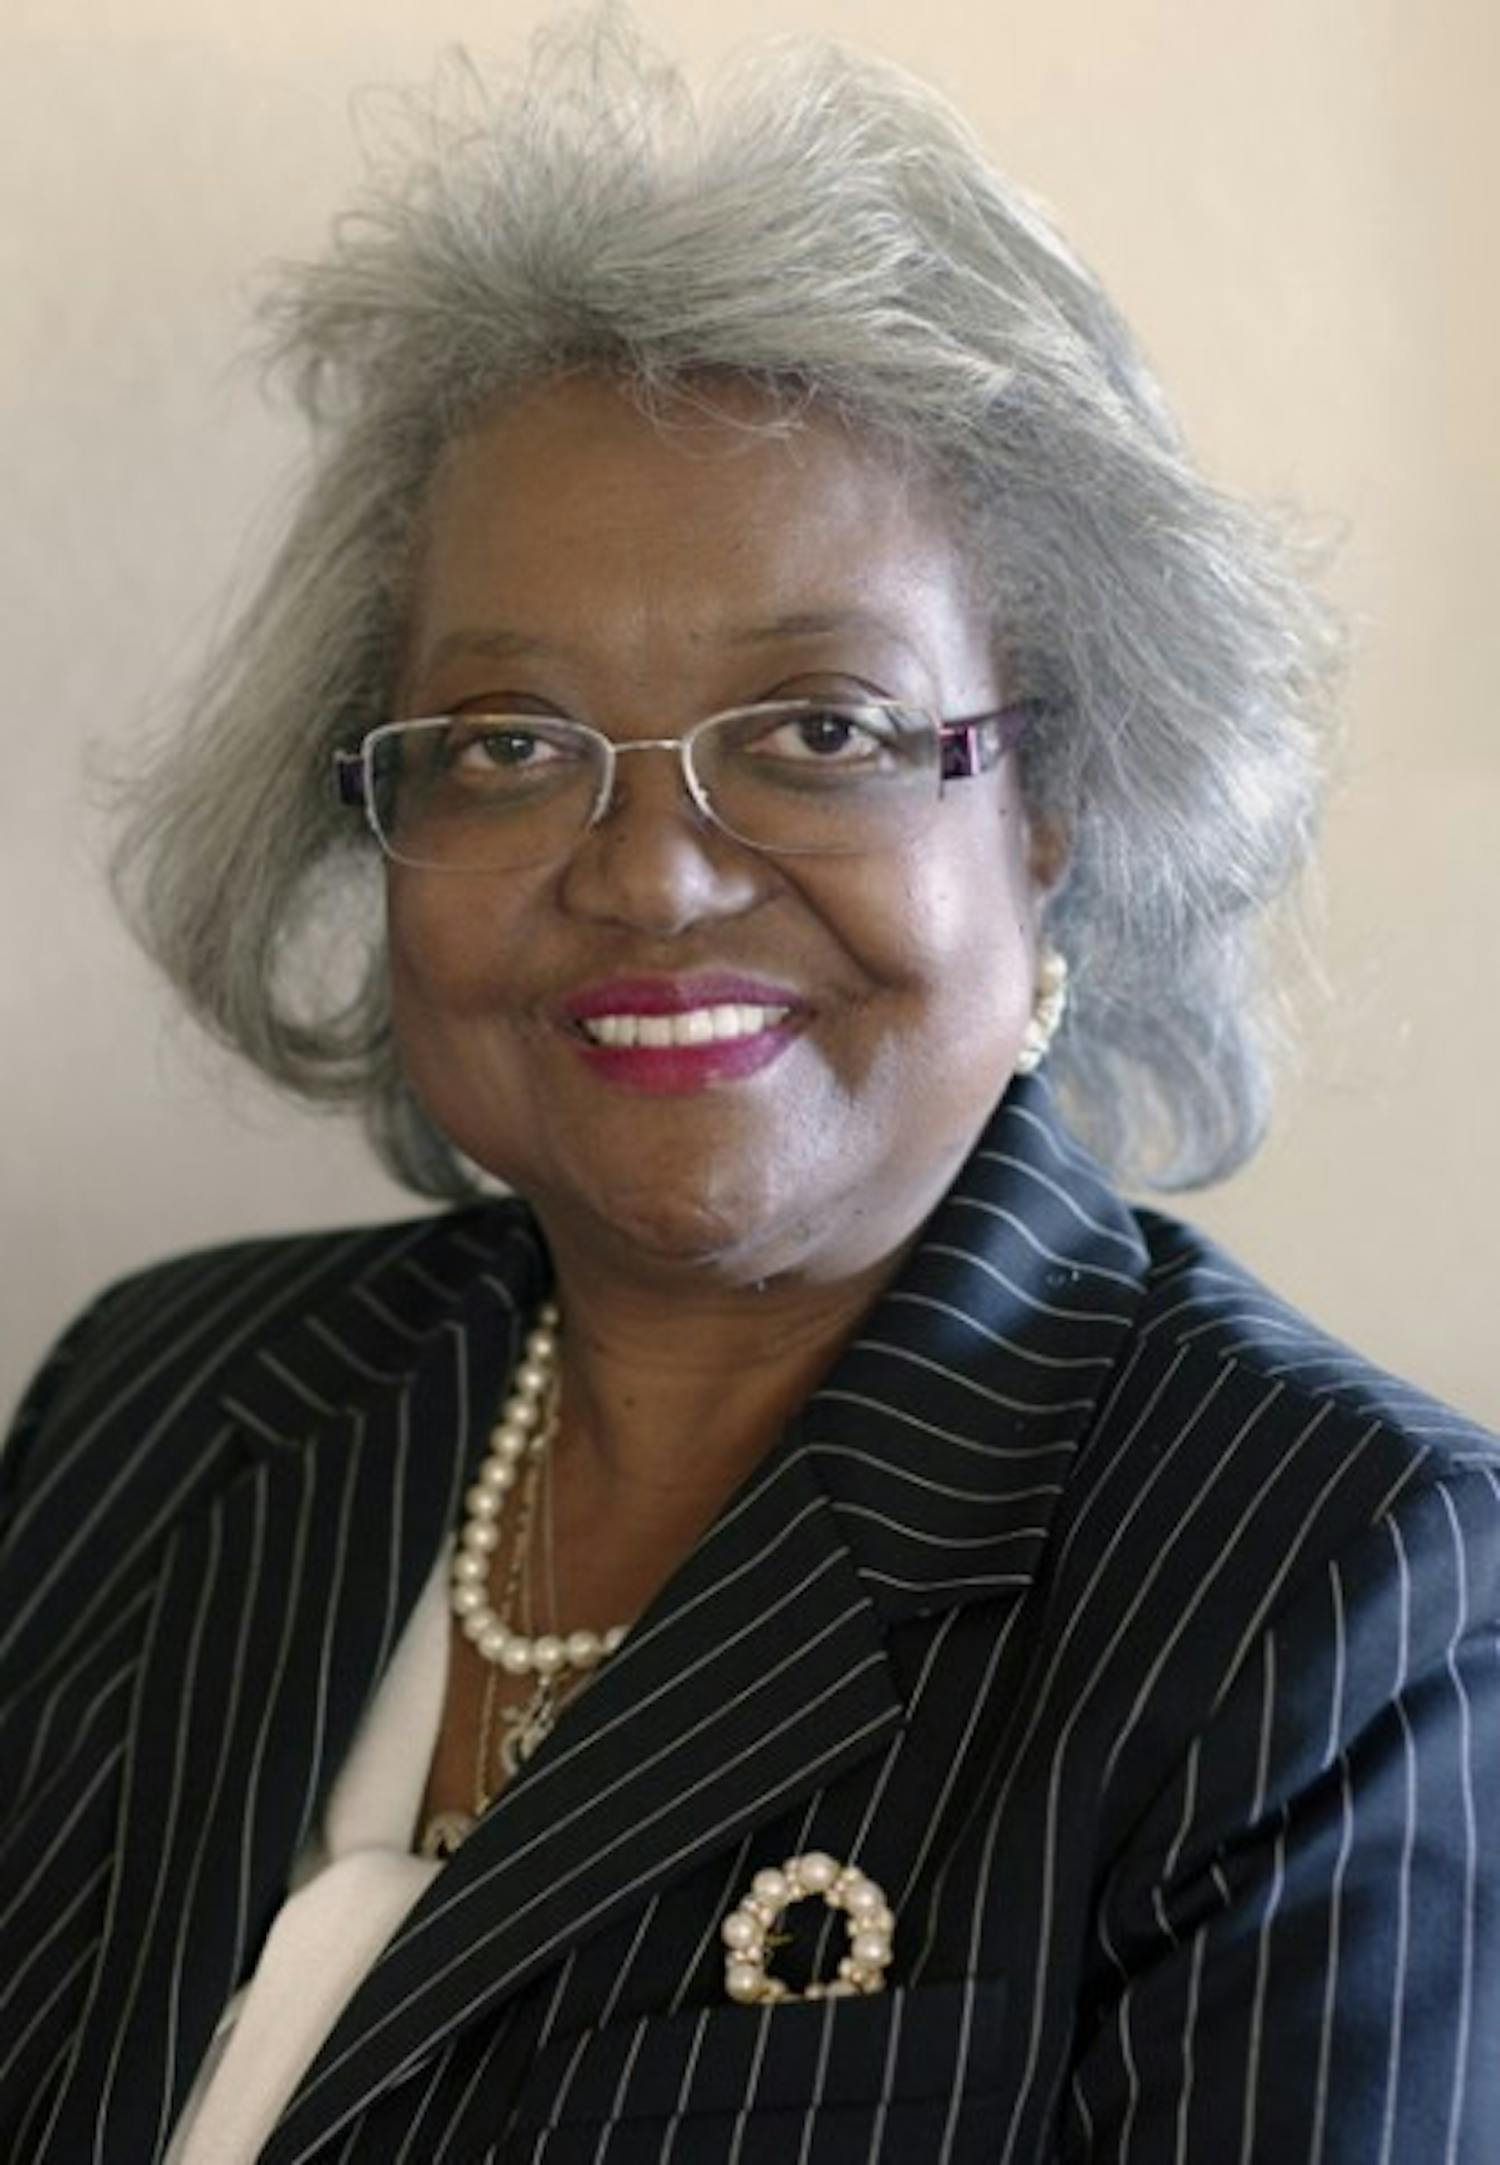 Yvonne Hinson-Rawls, 64, is one of three candidates running for the District 1 seat of the Gainesville City Commission.